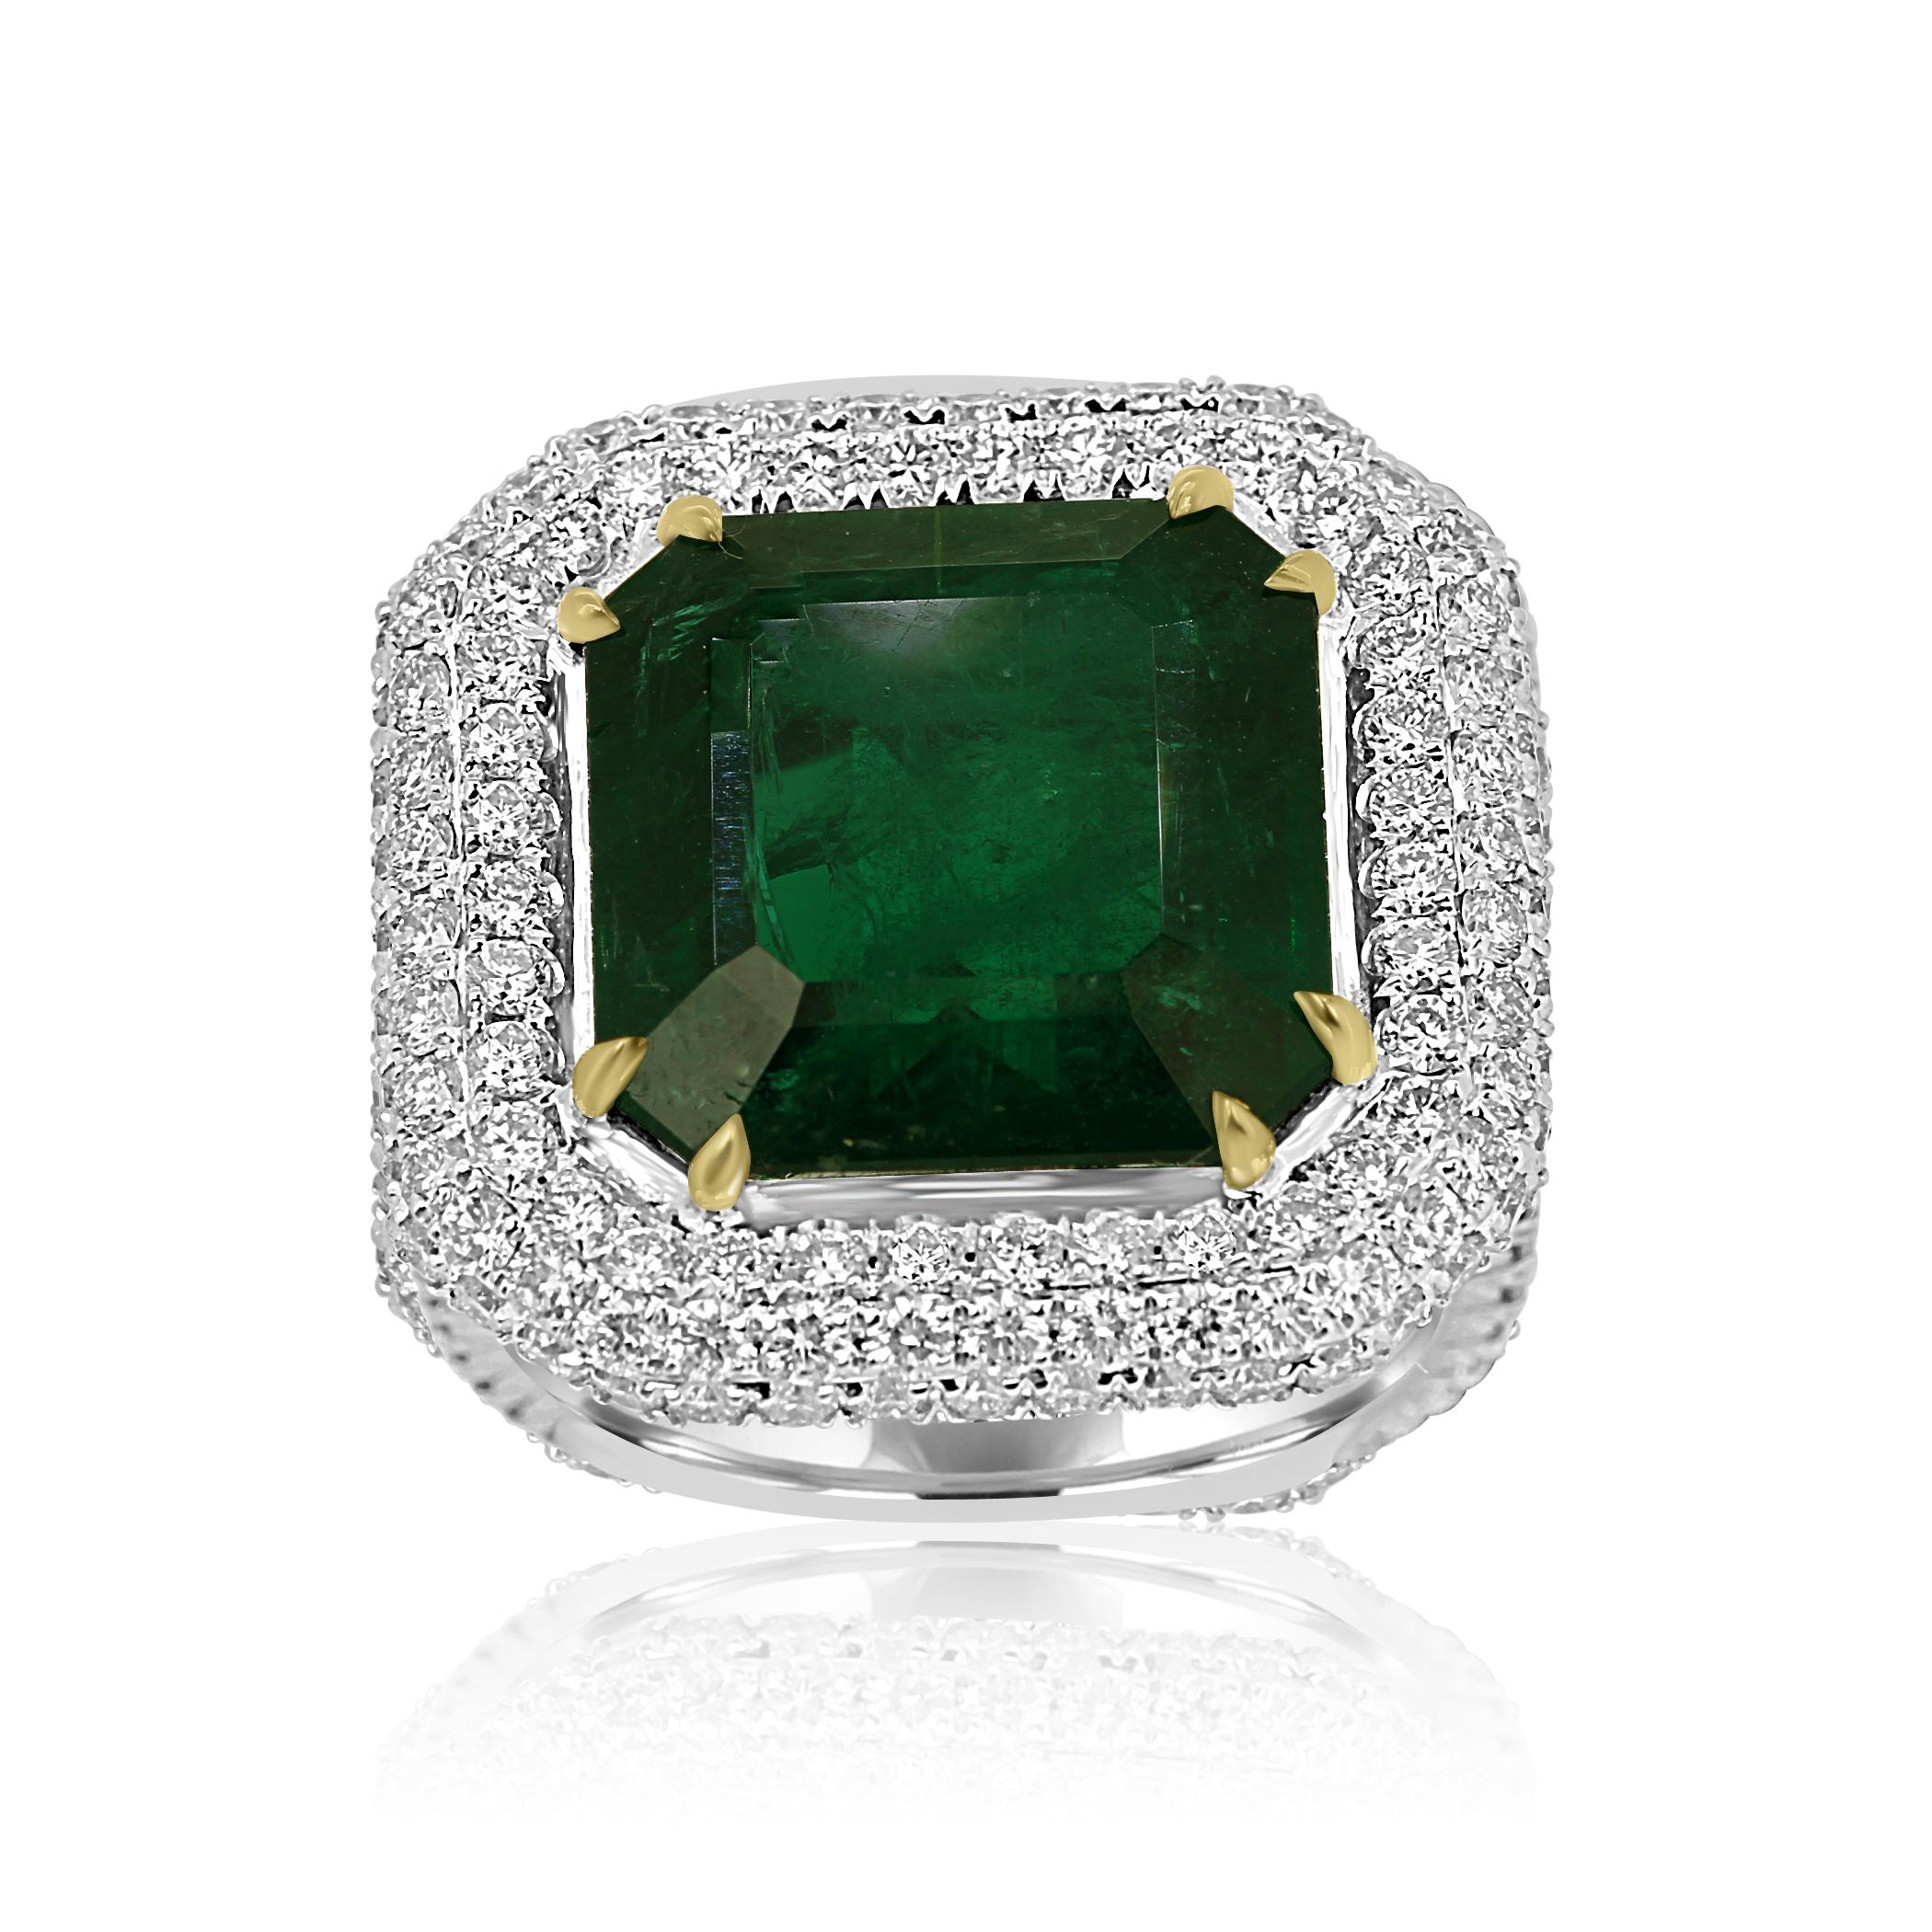 Stunning GIA certified 9.57 Carat Minor Zambian Emerald Cut Emerald encircled in triple Halo of White G-H Color VS-SI diamonds 2.21 Carats in stylish one of a kind handmade 18K White and Yellow Gold Cocktail Statement Ring.

MADE IN USA 
Center